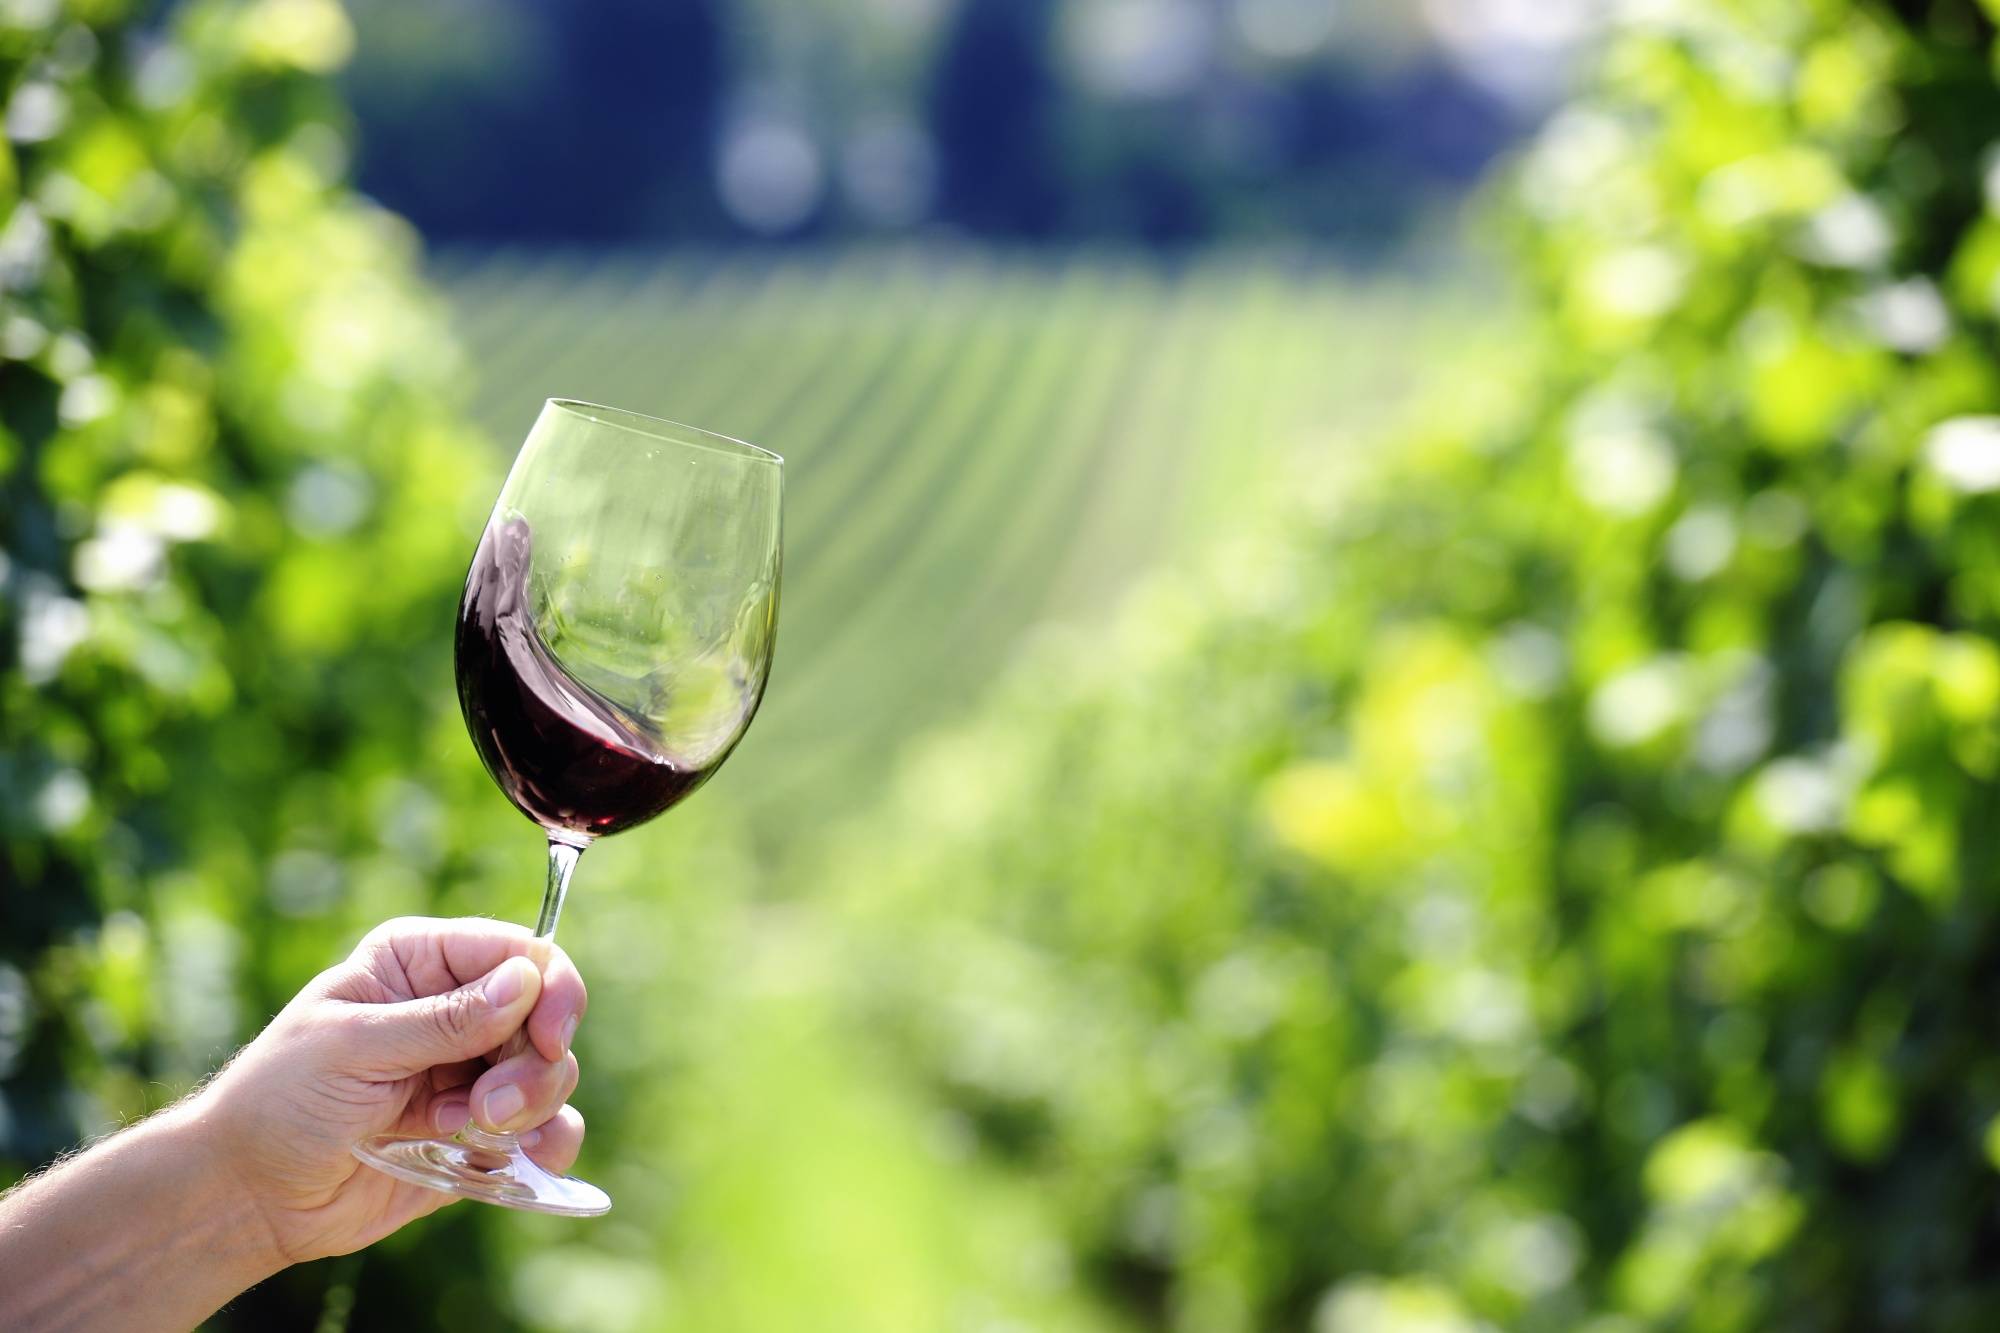 Person holding red wine glass by the stem, vineyard in the background